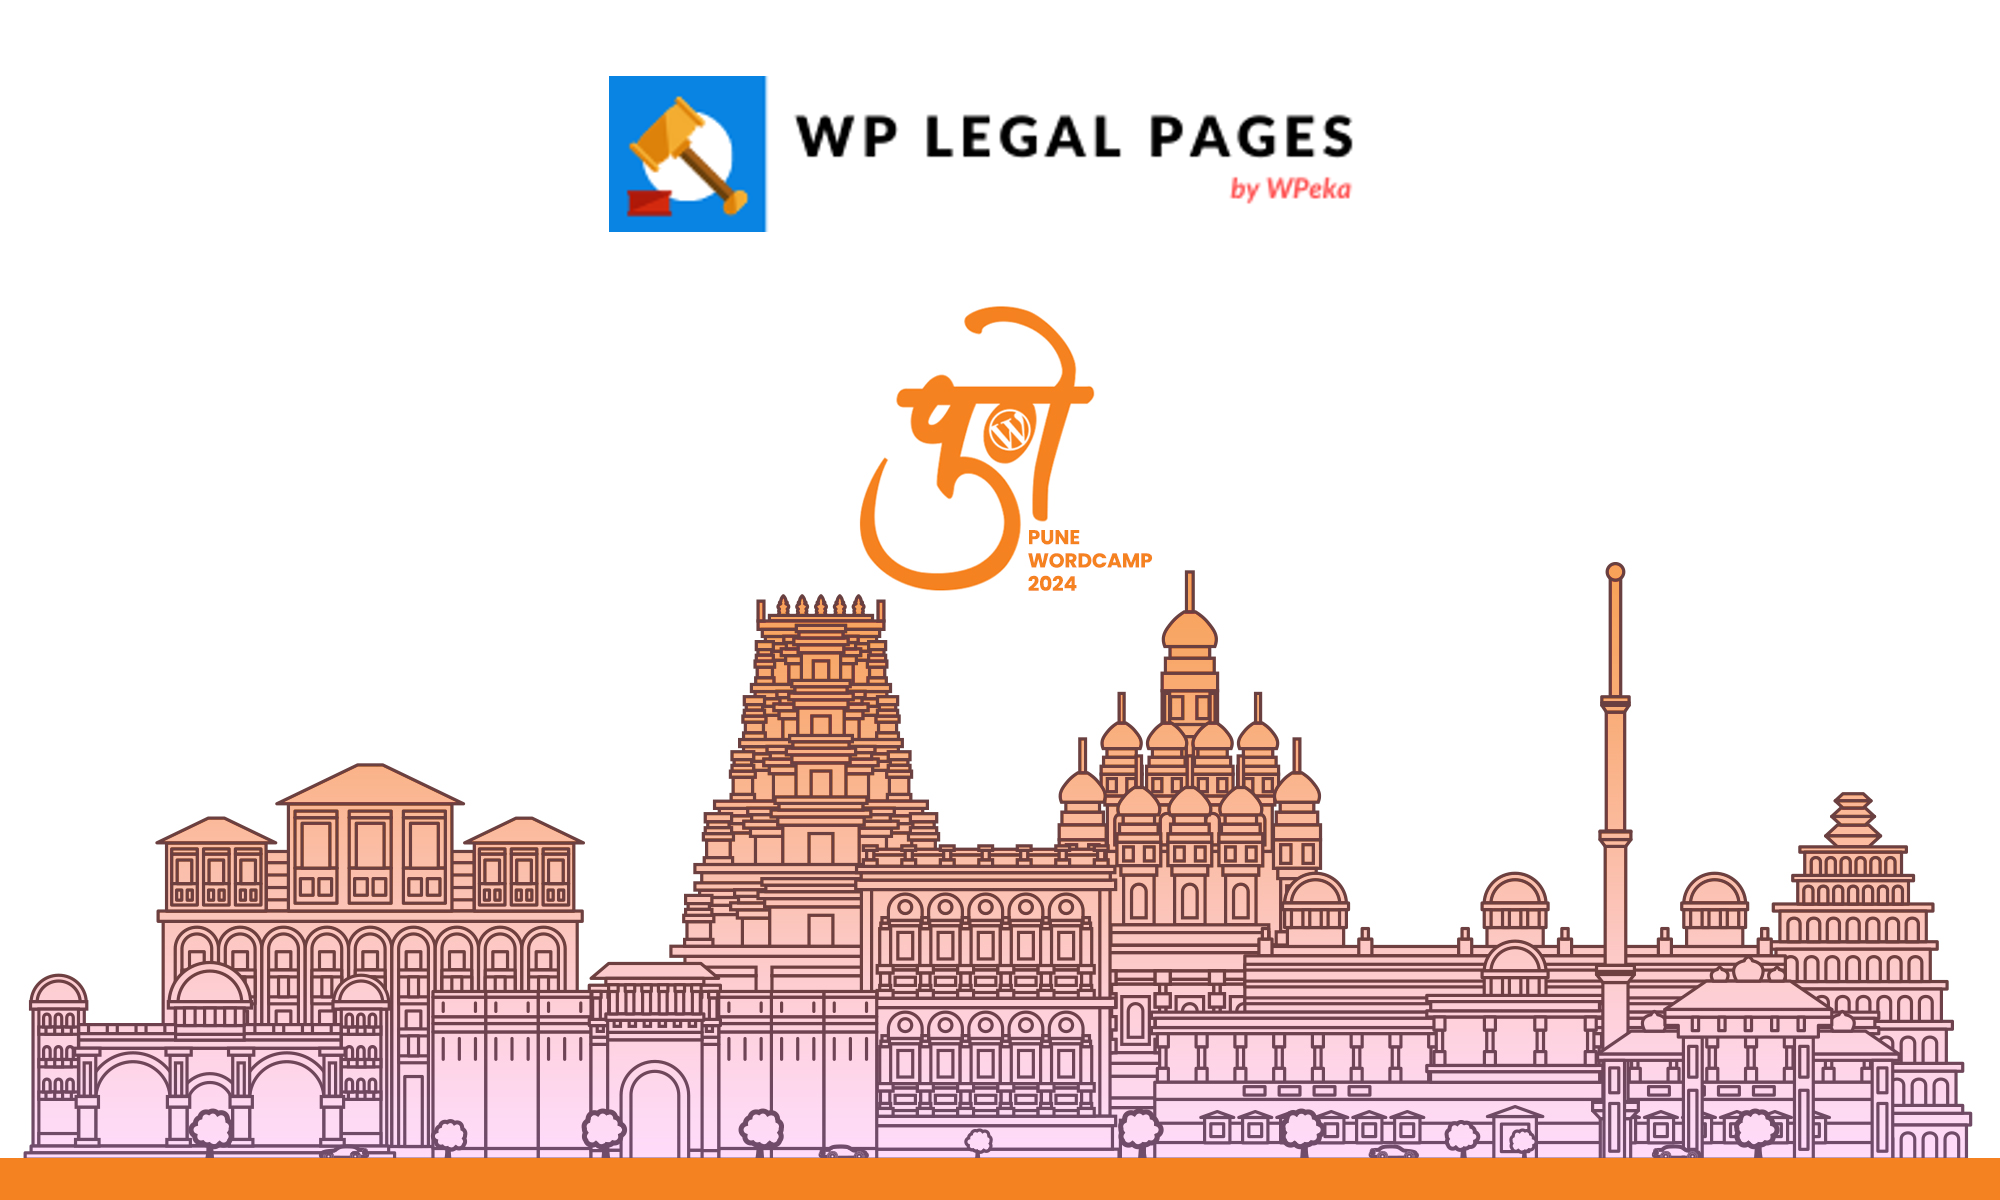 Announcing WP Legal Pages, our Silver Sponsor